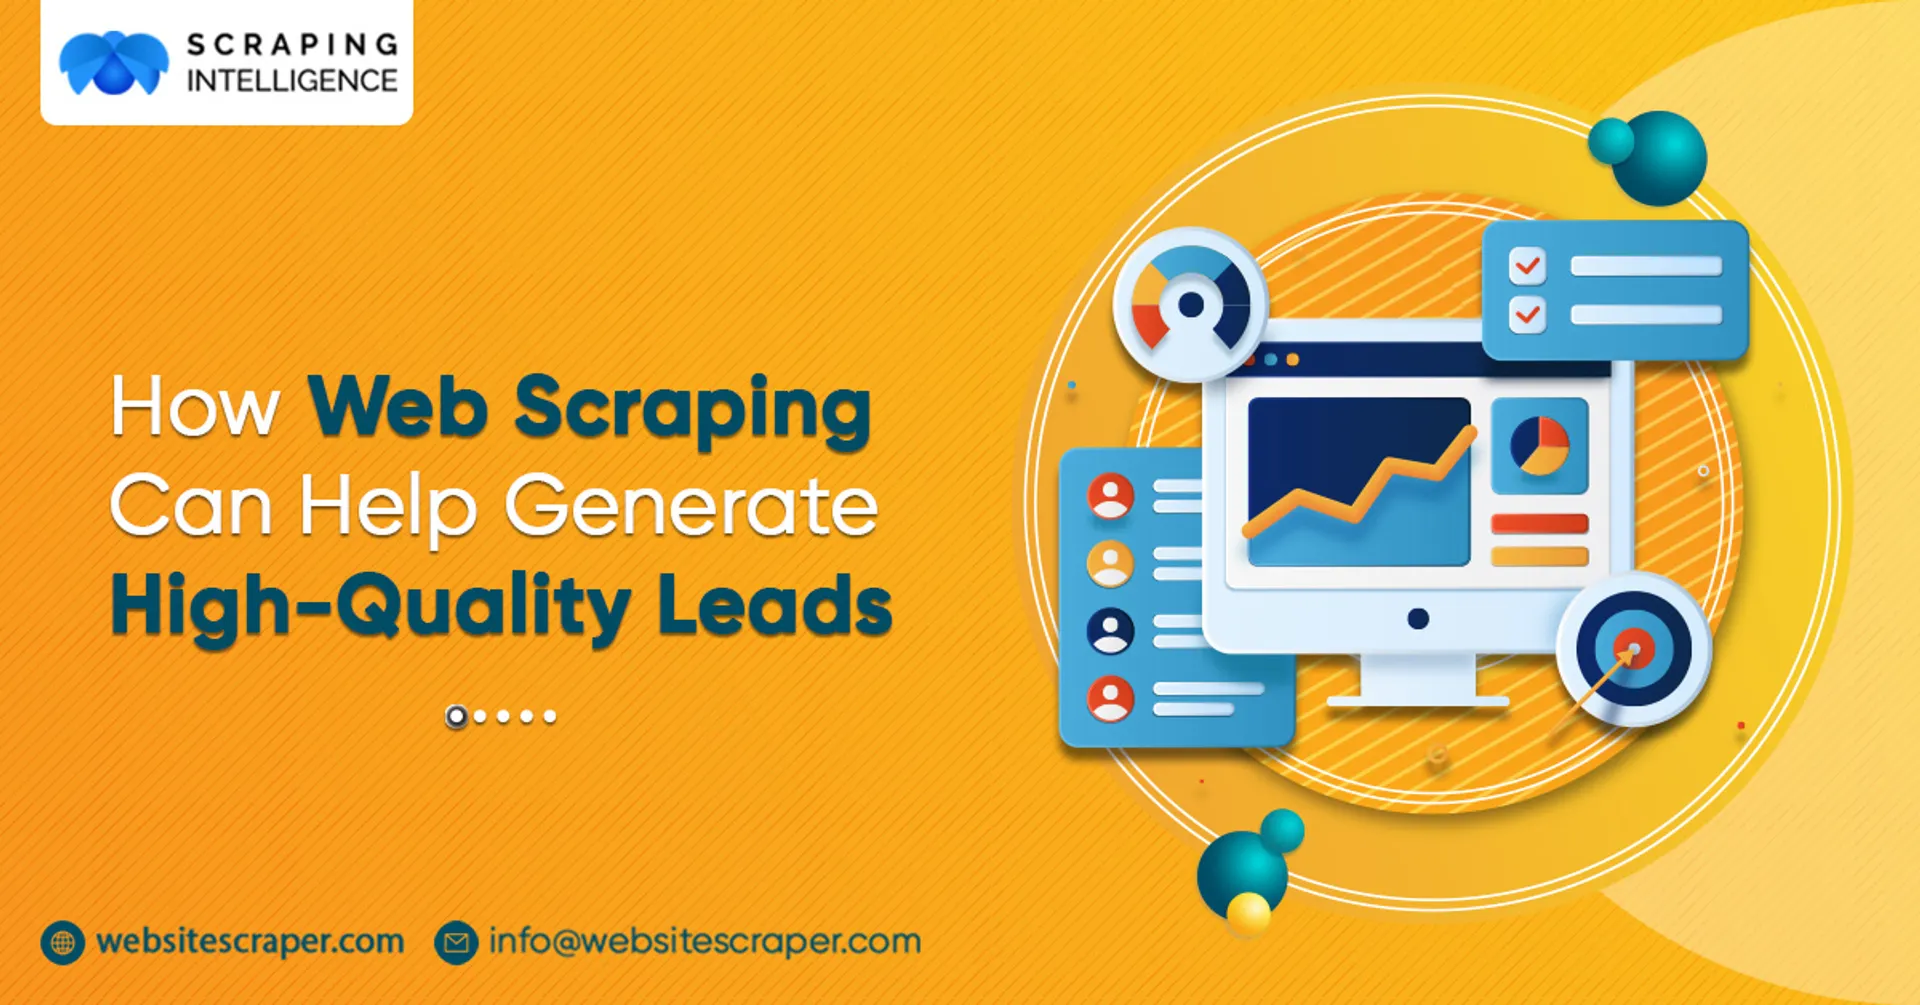 Web Scraping For Lead Generation: Get High-Quality Sales Leads

Acquiring new clients is critical for any business, and the easiest method to accomplish so is through lead creation. Your sales team can convert as many leads as possible, but obtaining thousands of potential customers is difficult if your organization has limited resources. Capturing thousands of new leads might be overwhelming, especially if your organization has a small sales team.

Web scraping allows you to collect valuable information such as contact details, company information, and customer preferences from across the web. This means you can target your ideal customers with laser precision, increasing your chances of conversion. Whether you're a small startup or a seasoned enterprise, web scraping can be customized to suit your specific needs, helping you stay ahead in today's competitive business landscape.

But remember, while web scraping offers incredible potential, it's crucial to respect the privacy and terms of use of the websites you're scraping from. Always ensure you have the necessary permissions and adhere to ethical scraping practices. With the right approach, web scraping can be a game-changer for your lead generation strategy, providing you with a steady stream of high-quality leads ready to convert into loyal customers. 🔍📈 #LeadGeneration #WebScraping #SalesLeads

https://www.websitescraper.com/web-scraping-for-generate-high-quality-leads.php